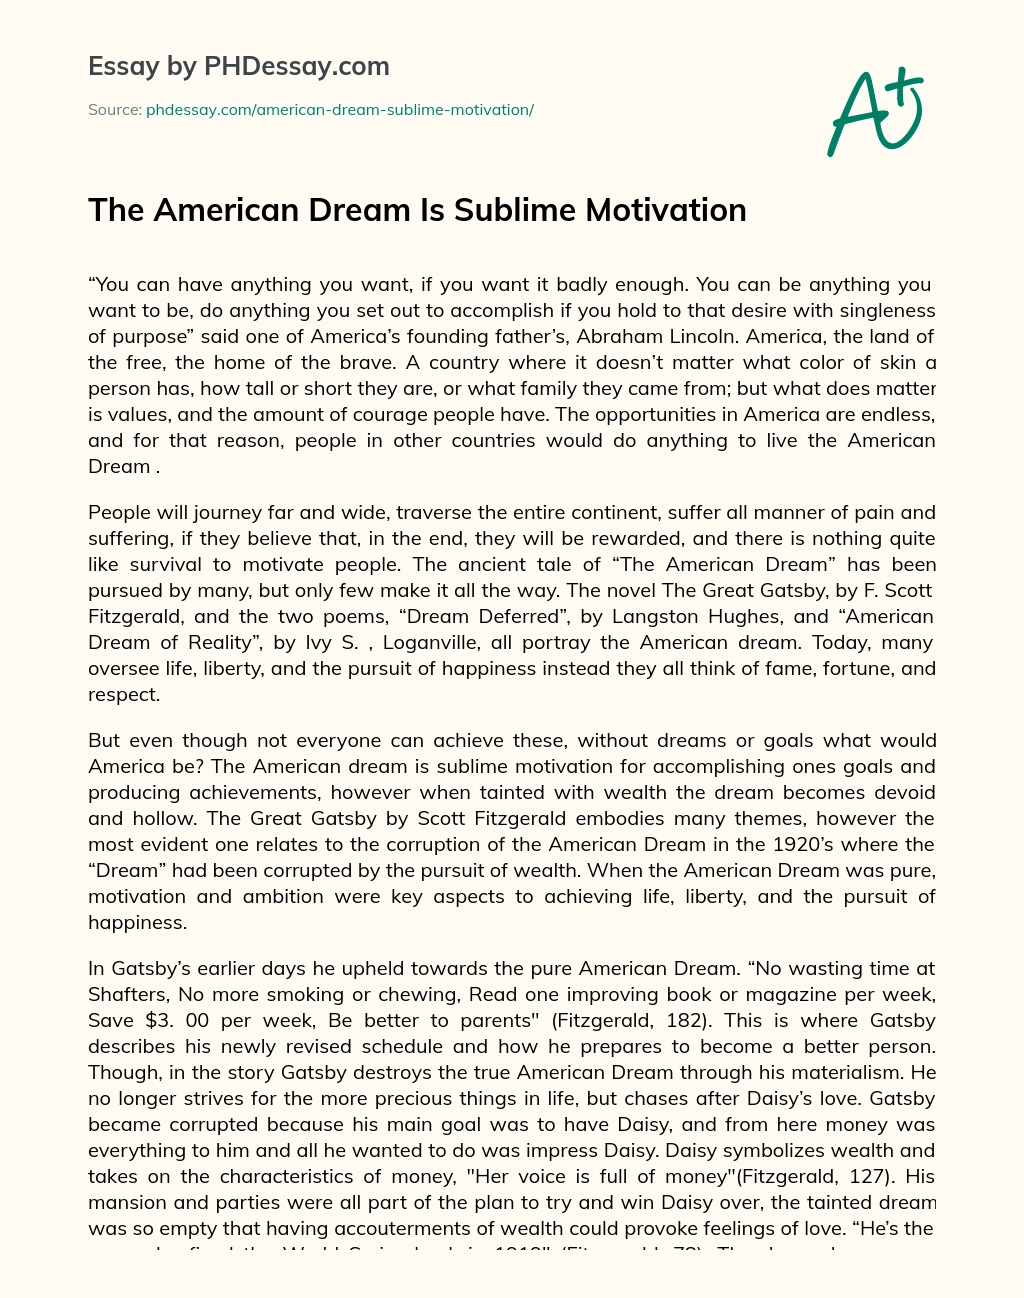 The American Dream Is Sublime Motivation essay